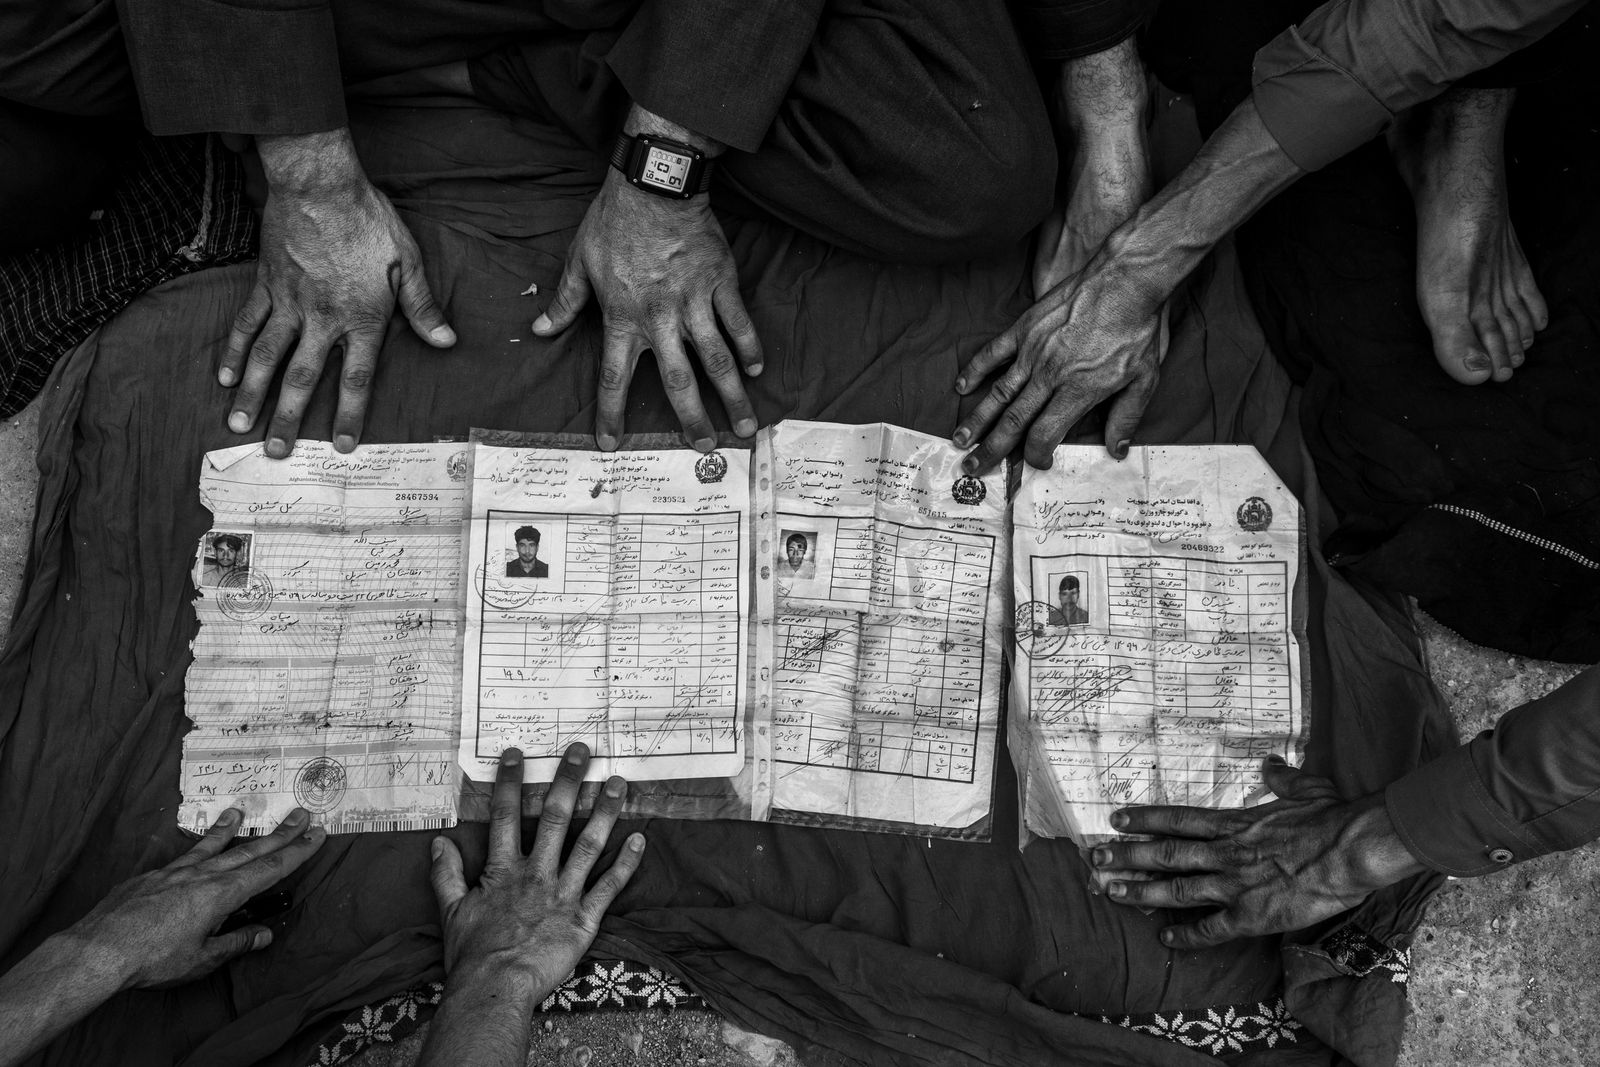 © Zobair Movahhed - Image from the Afghan Asylum Seekers in Iran photography project